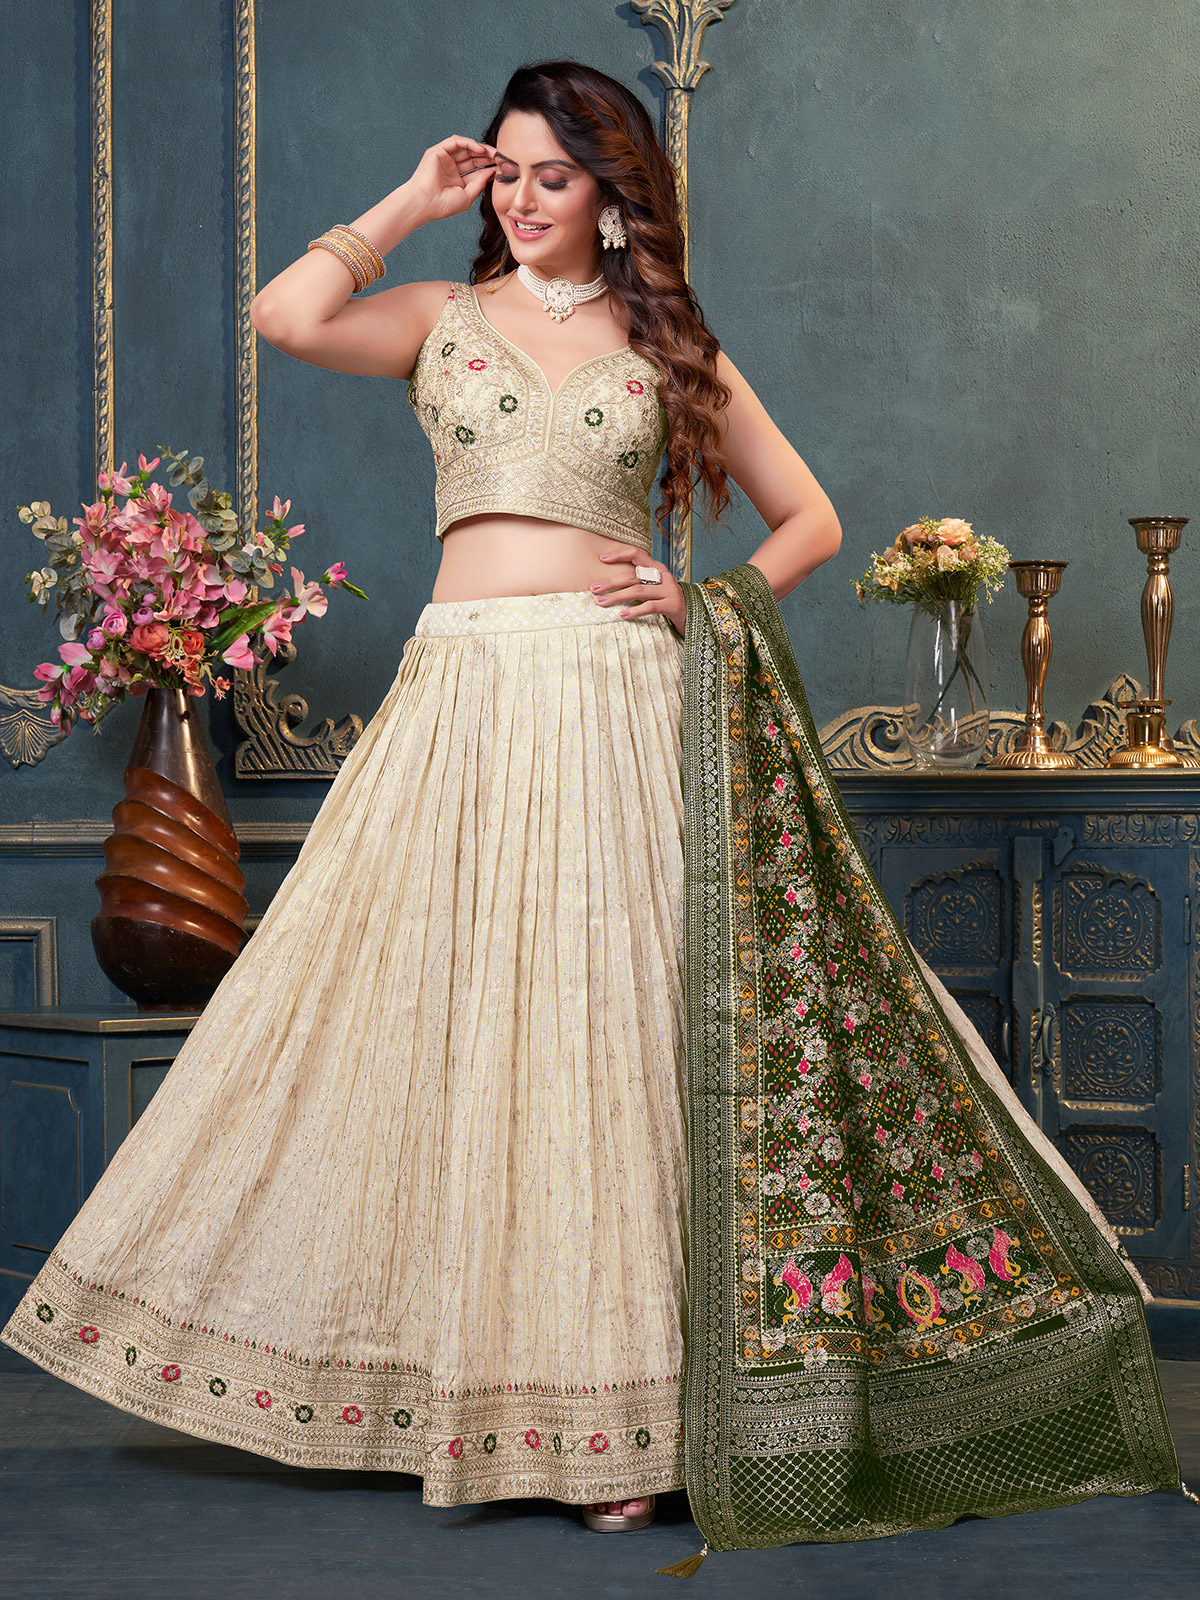 Ethnic Plus an Ethnic Wear Brand Launches Modern Touch Lehenga Collection -  Sangri Times English